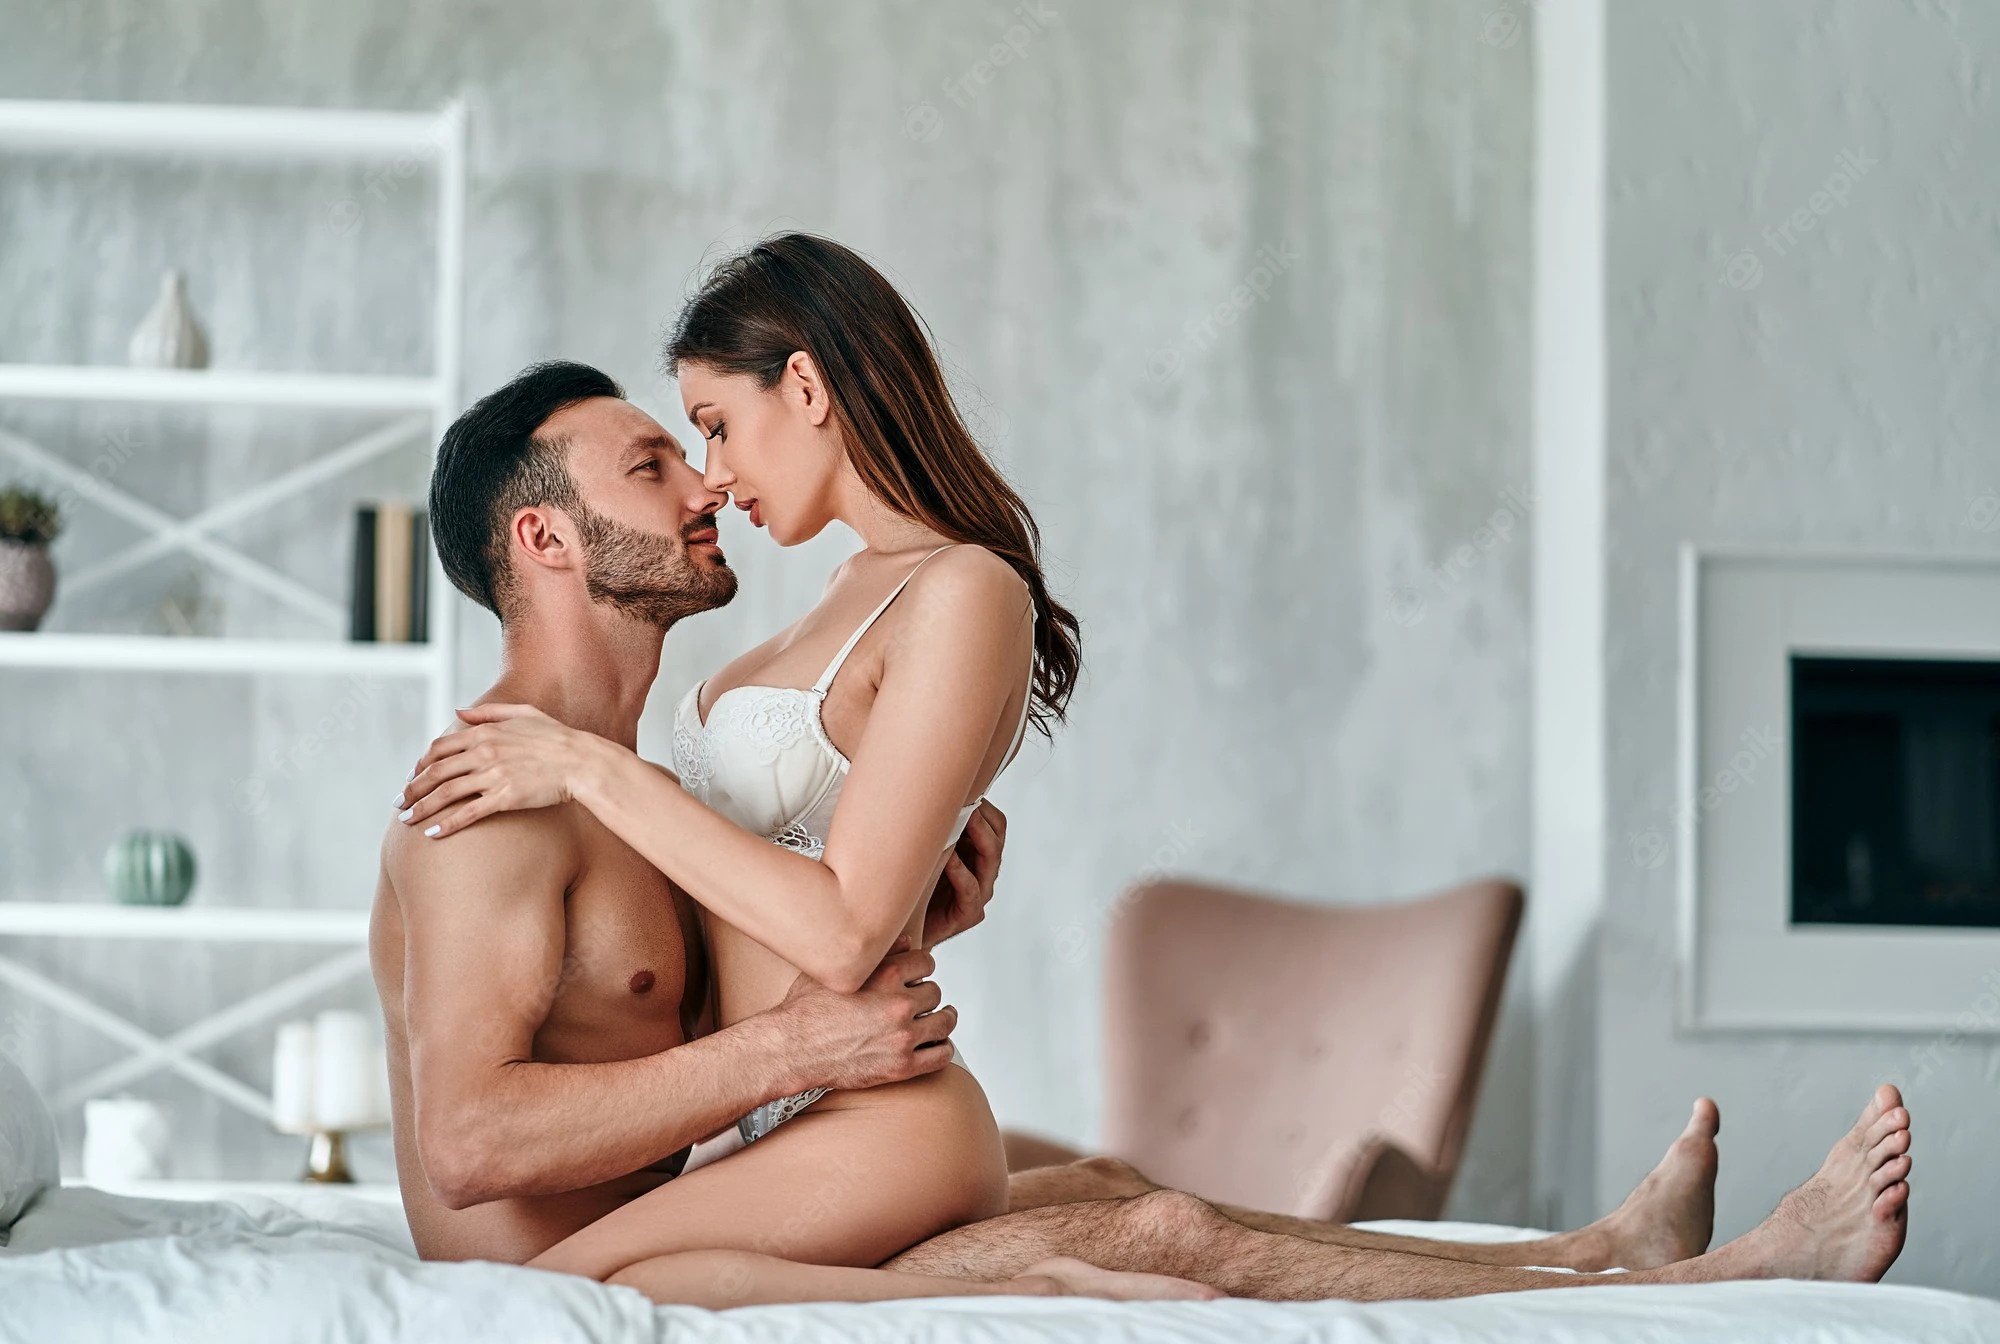 colleen cabrera share best porn videos for couples photos